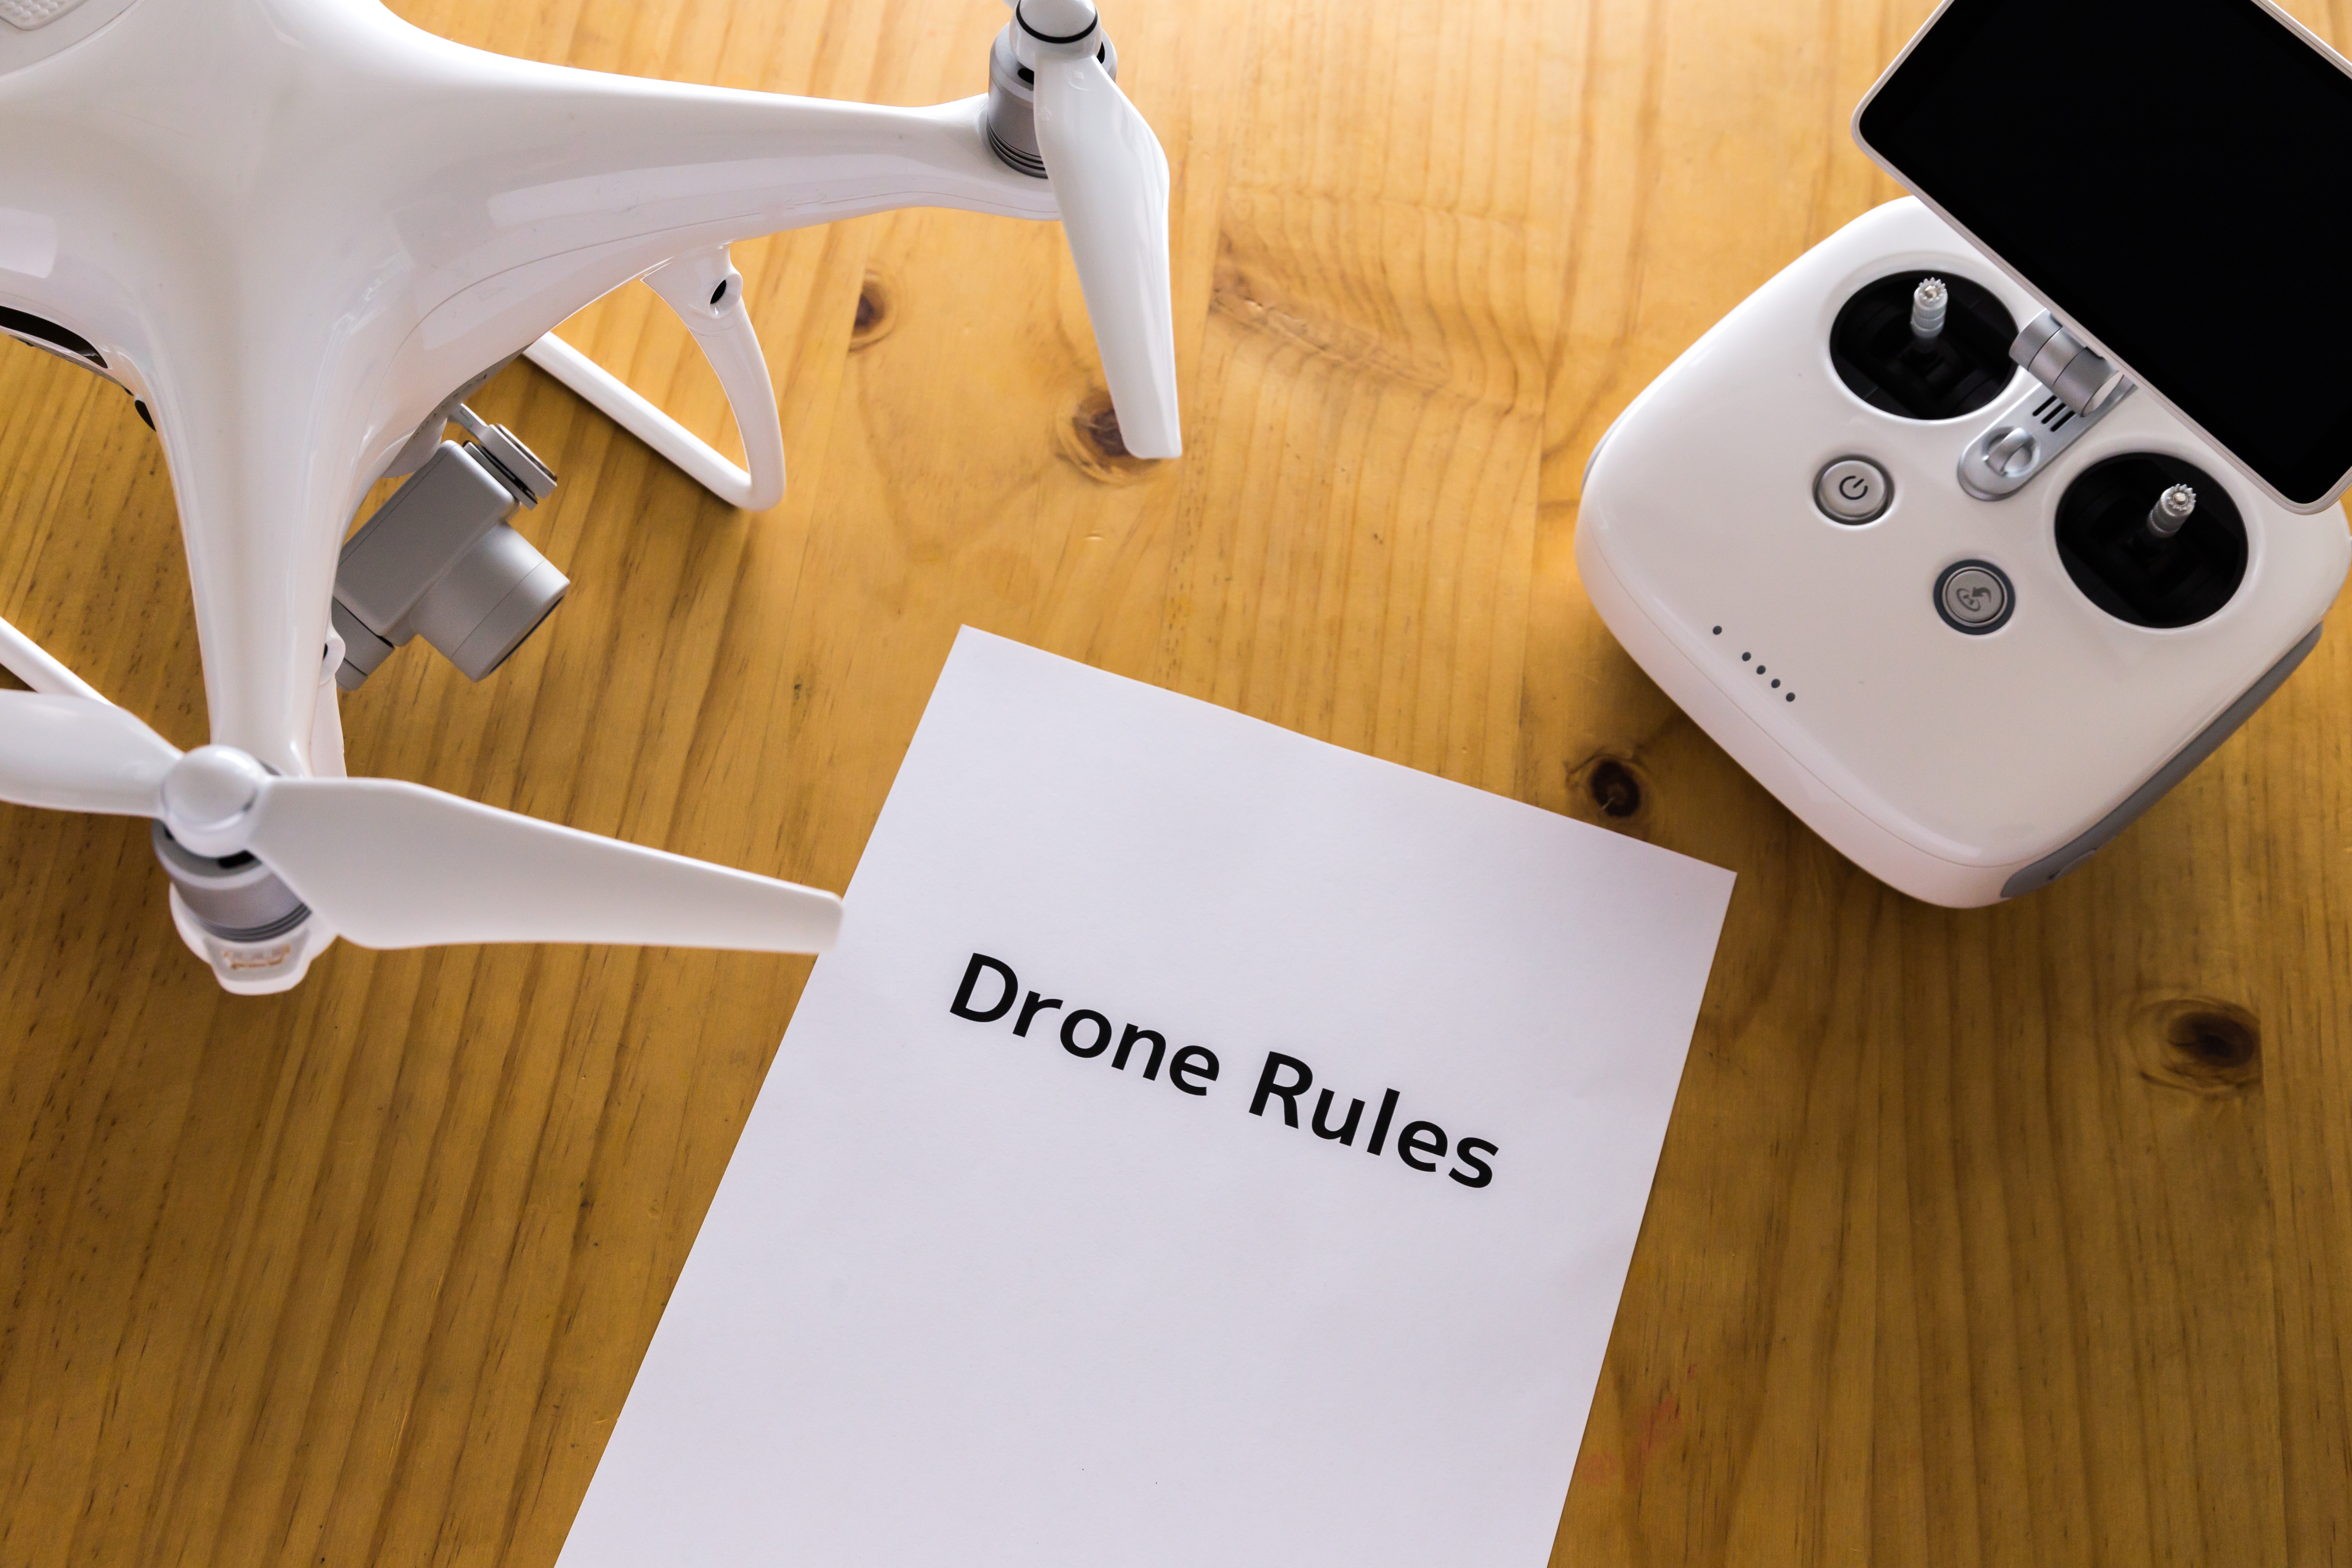 Drone rules are always changing